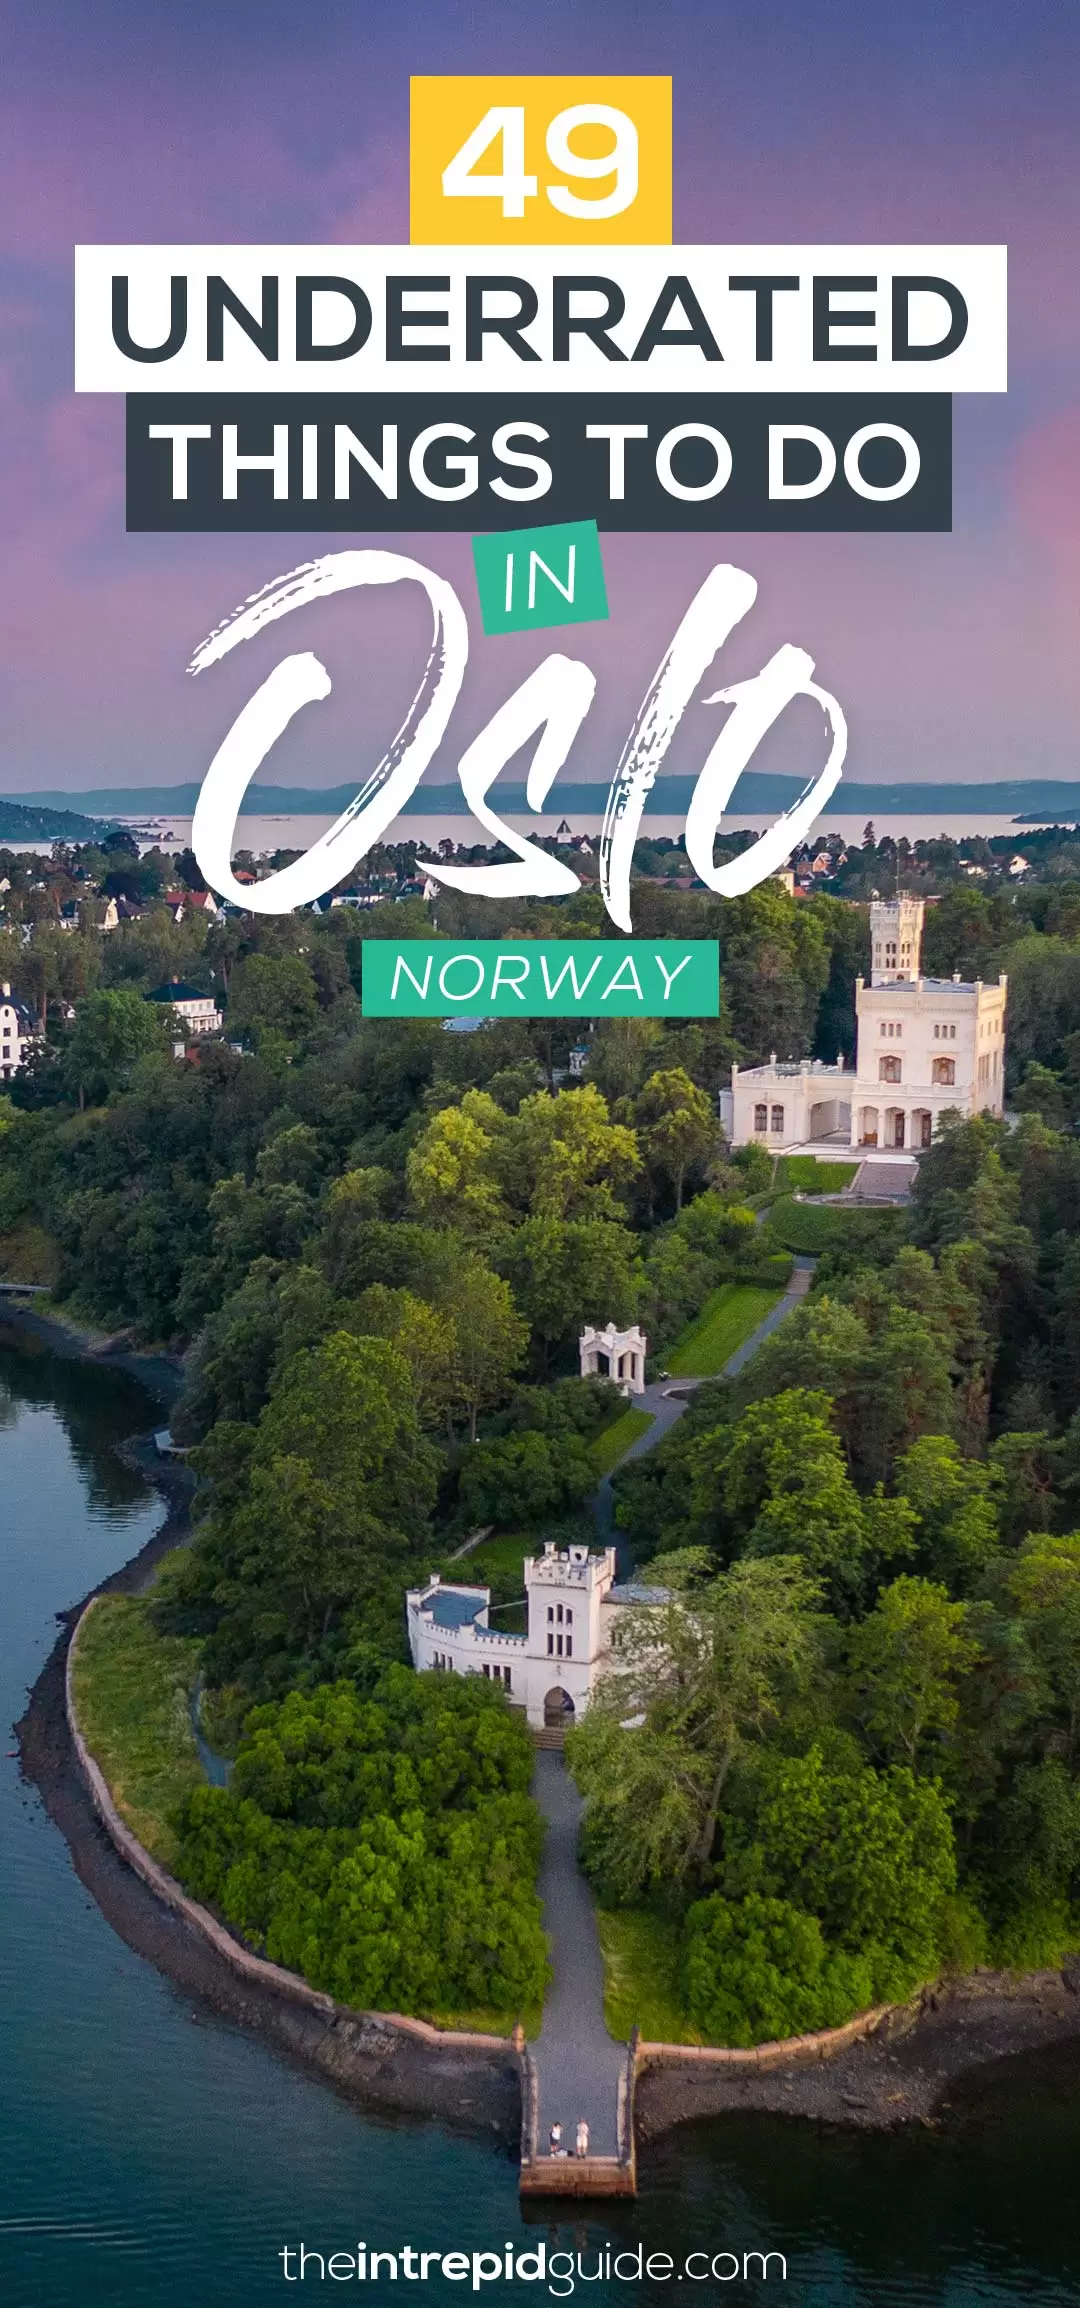 49 underrated things to do in Oslo, Norway